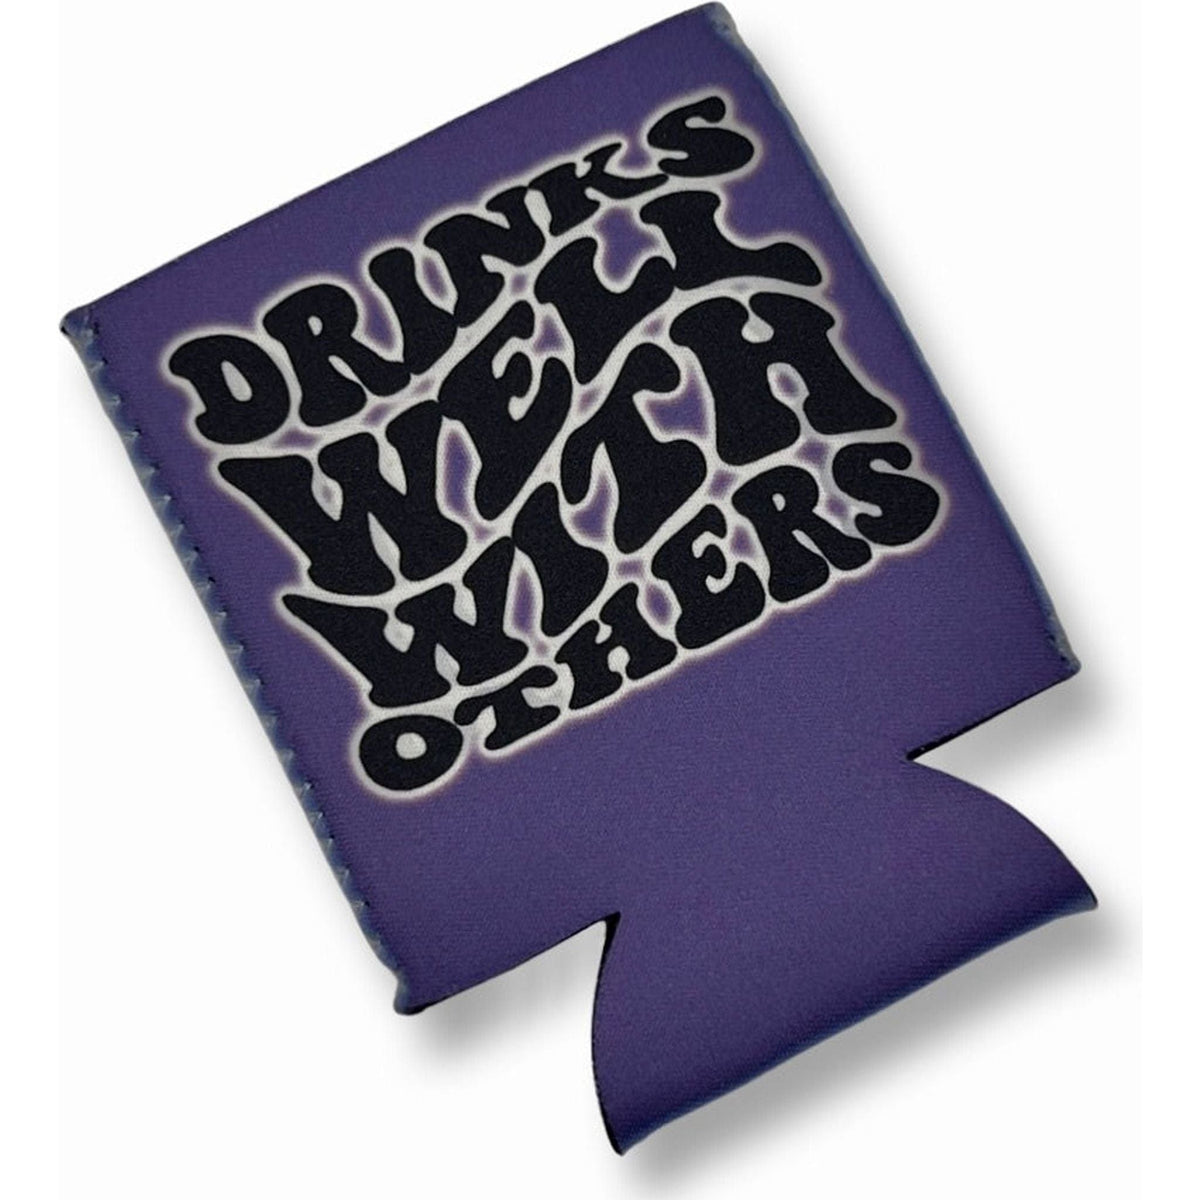 Drinks Well With Others - Koozie TheFringeCultureCollective